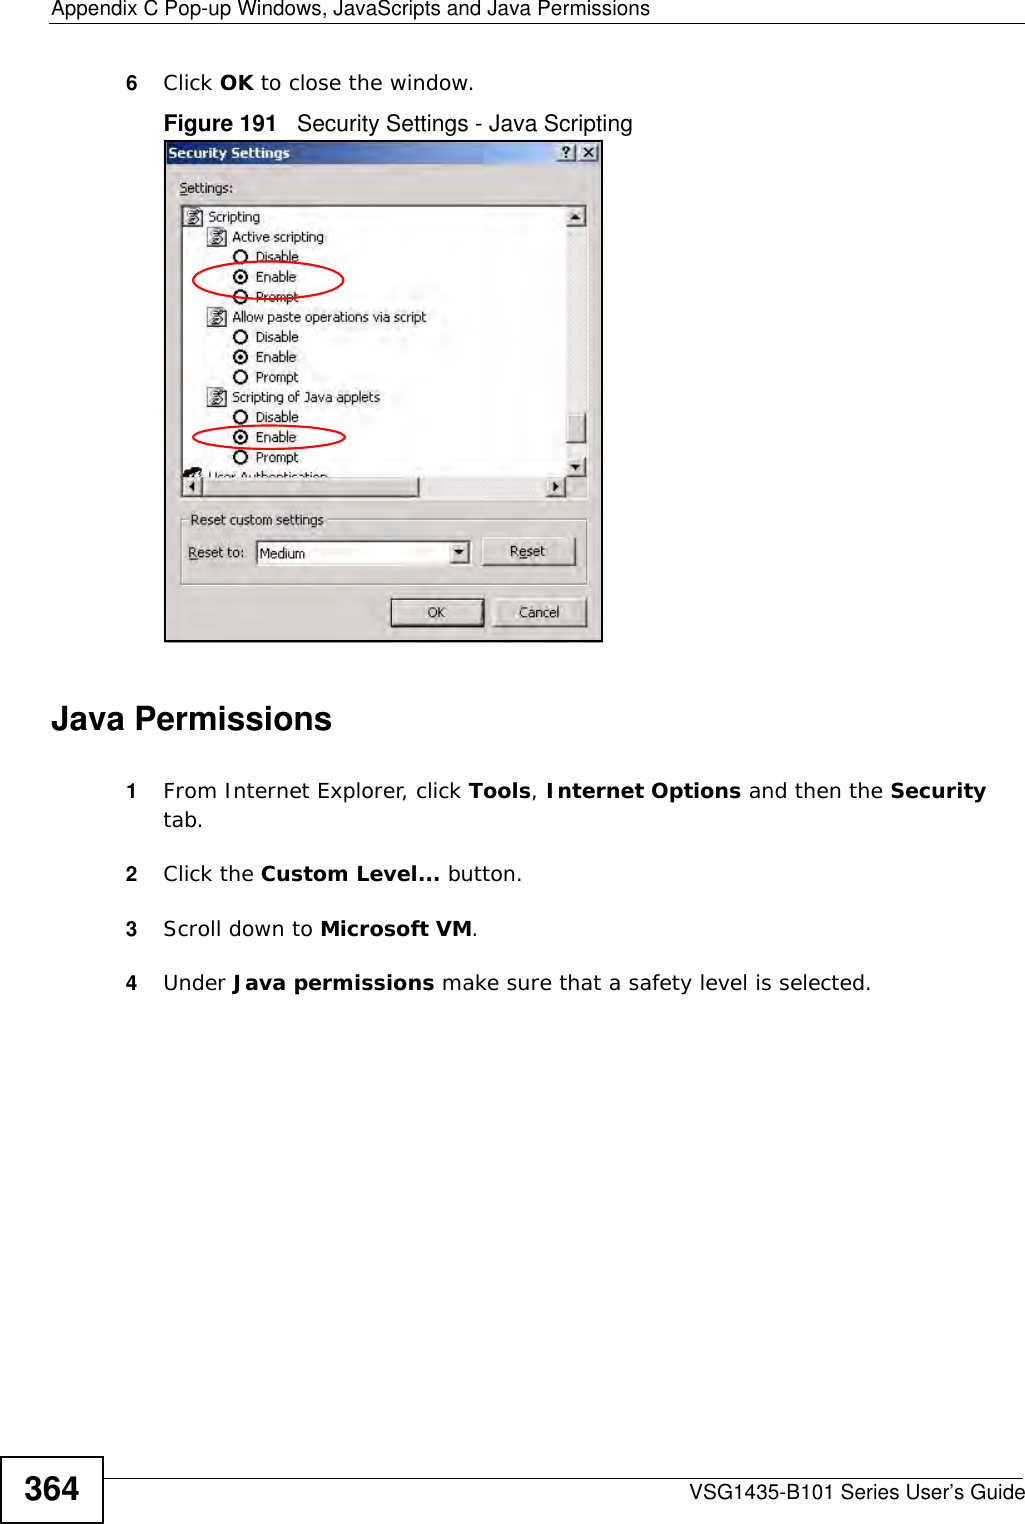 Appendix C Pop-up Windows, JavaScripts and Java PermissionsVSG1435-B101 Series User’s Guide3646Click OK to close the window.Figure 191   Security Settings - Java ScriptingJava Permissions1From Internet Explorer, click Tools, Internet Options and then the Security tab. 2Click the Custom Level... button. 3Scroll down to Microsoft VM. 4Under Java permissions make sure that a safety level is selected.